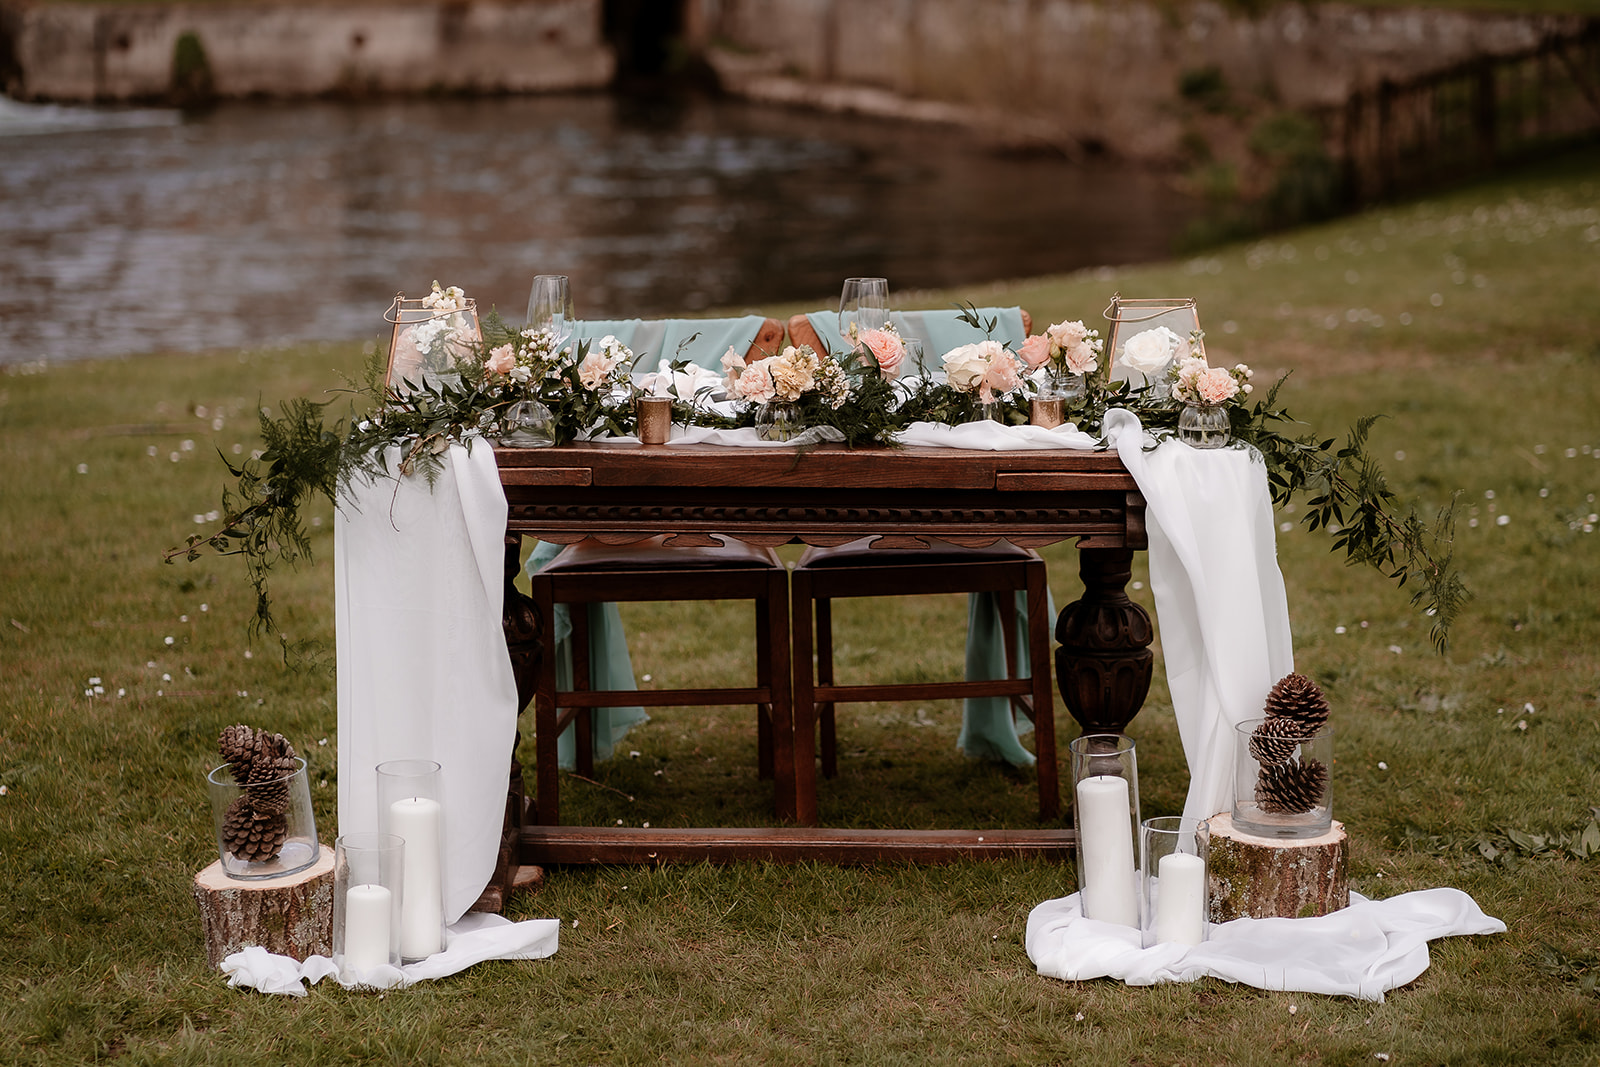 sweetheart table set up on the grounds of Mapledurham House wedding venue with chiffon drapes and candles in votives